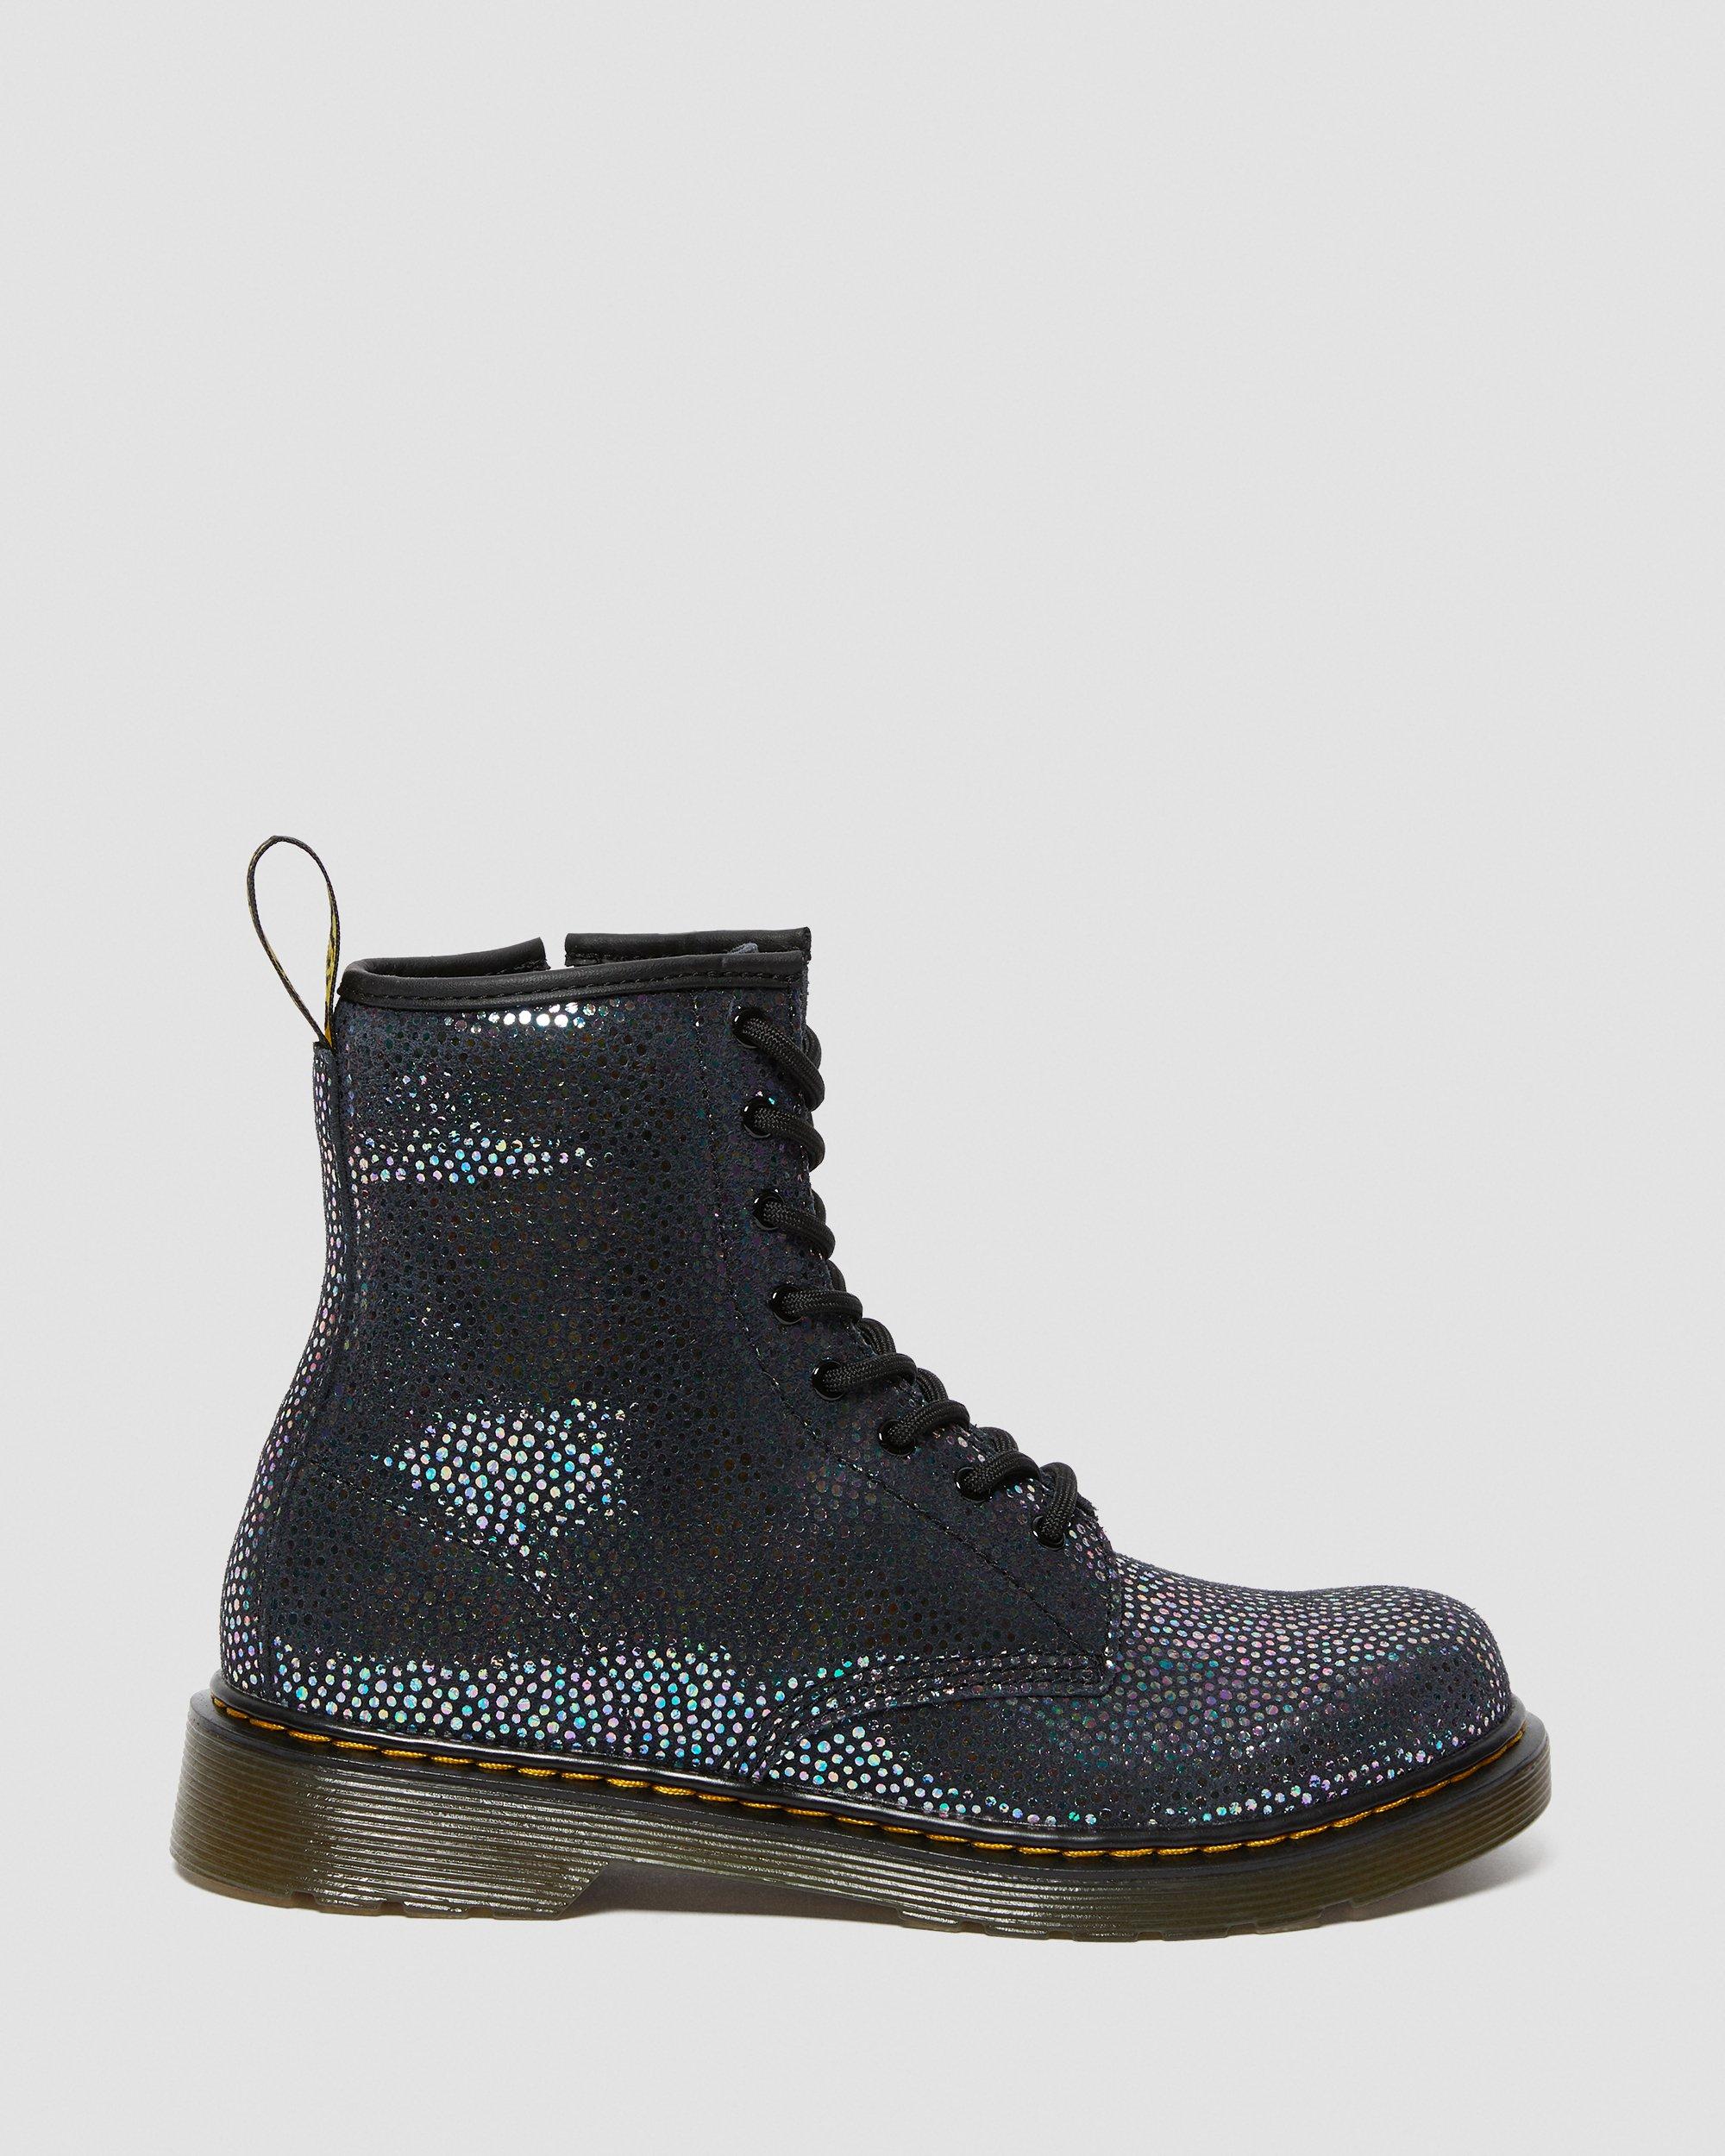 Youth 1460 Metallic Suede Lace Up Boots in Black